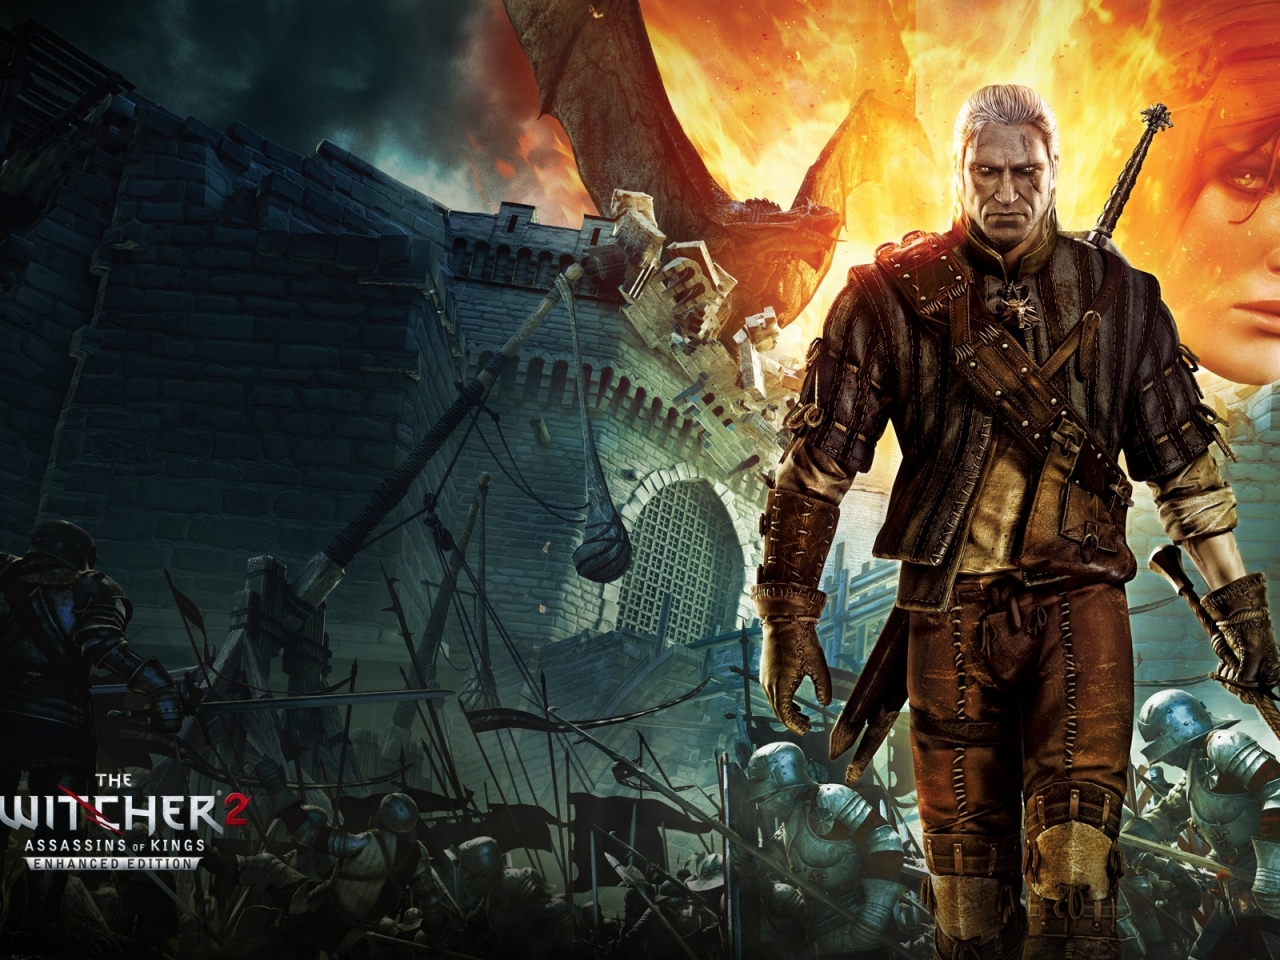 The Witcher 2 Assassins of Kings PC Game for 1280 x 960 resolution